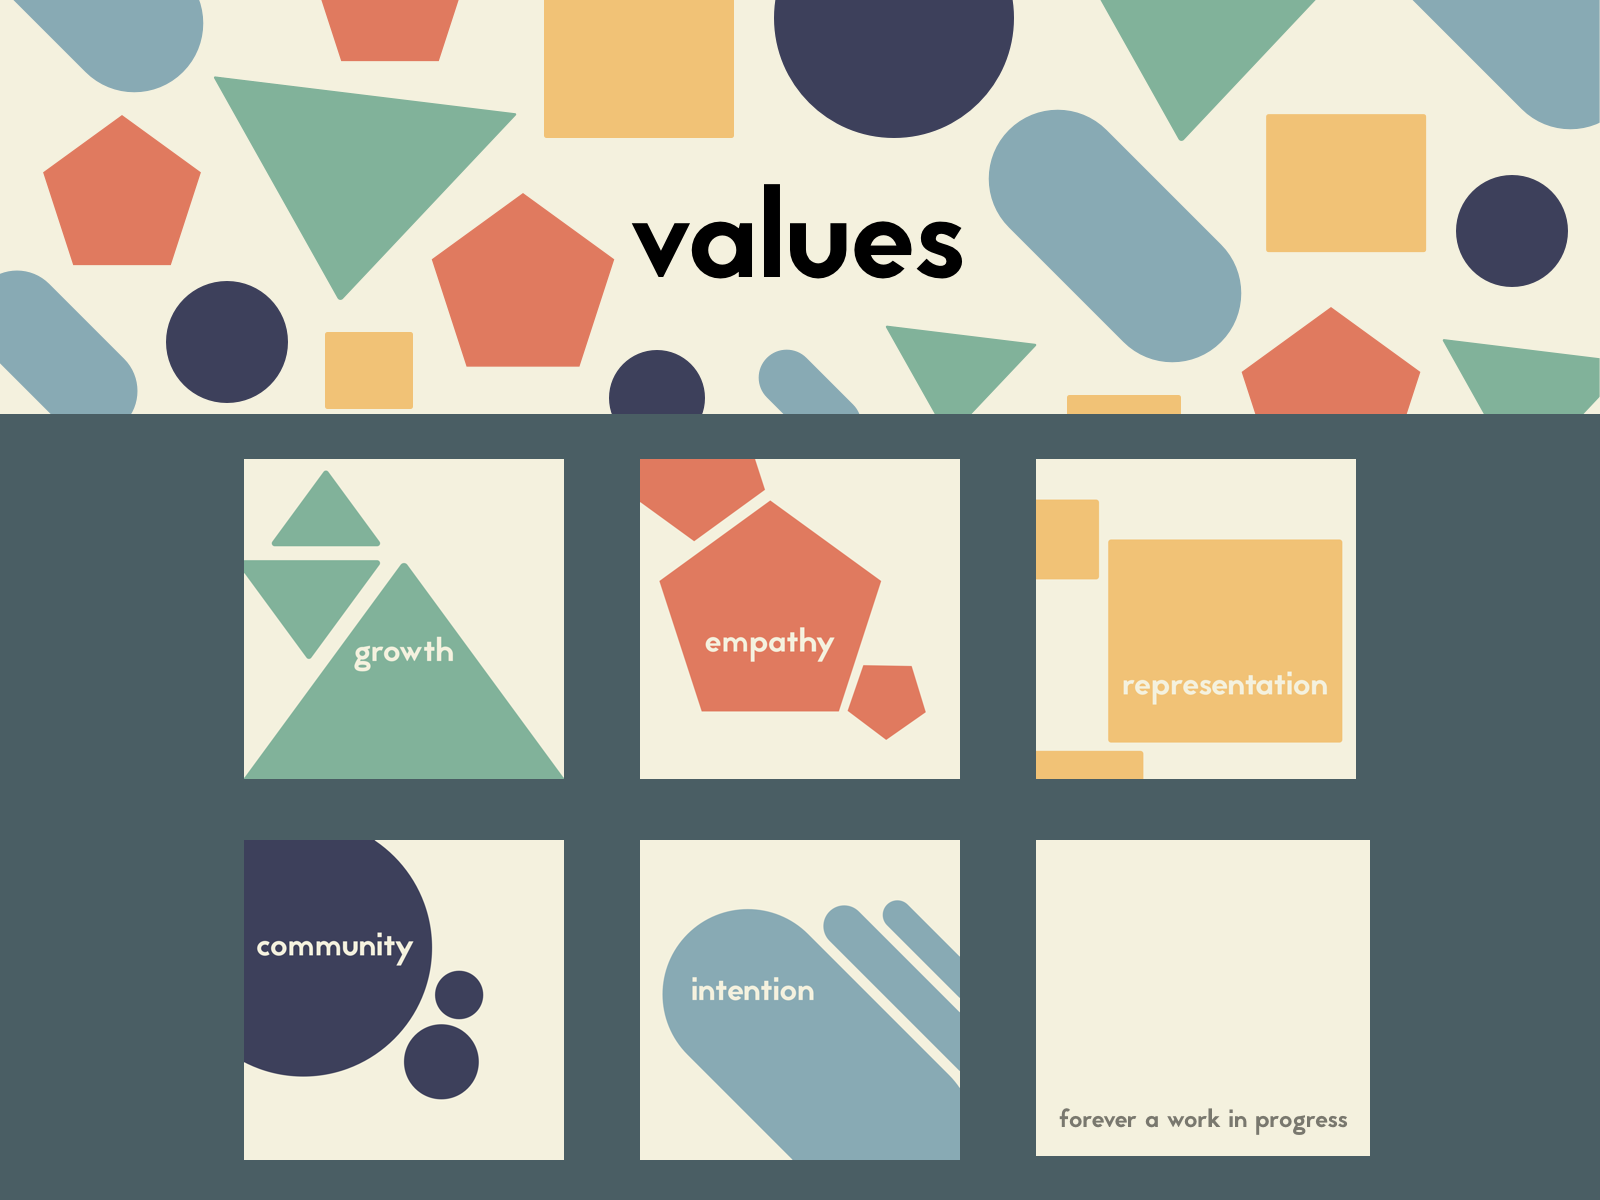 Available values. My values. My values in Life проект. My values are.